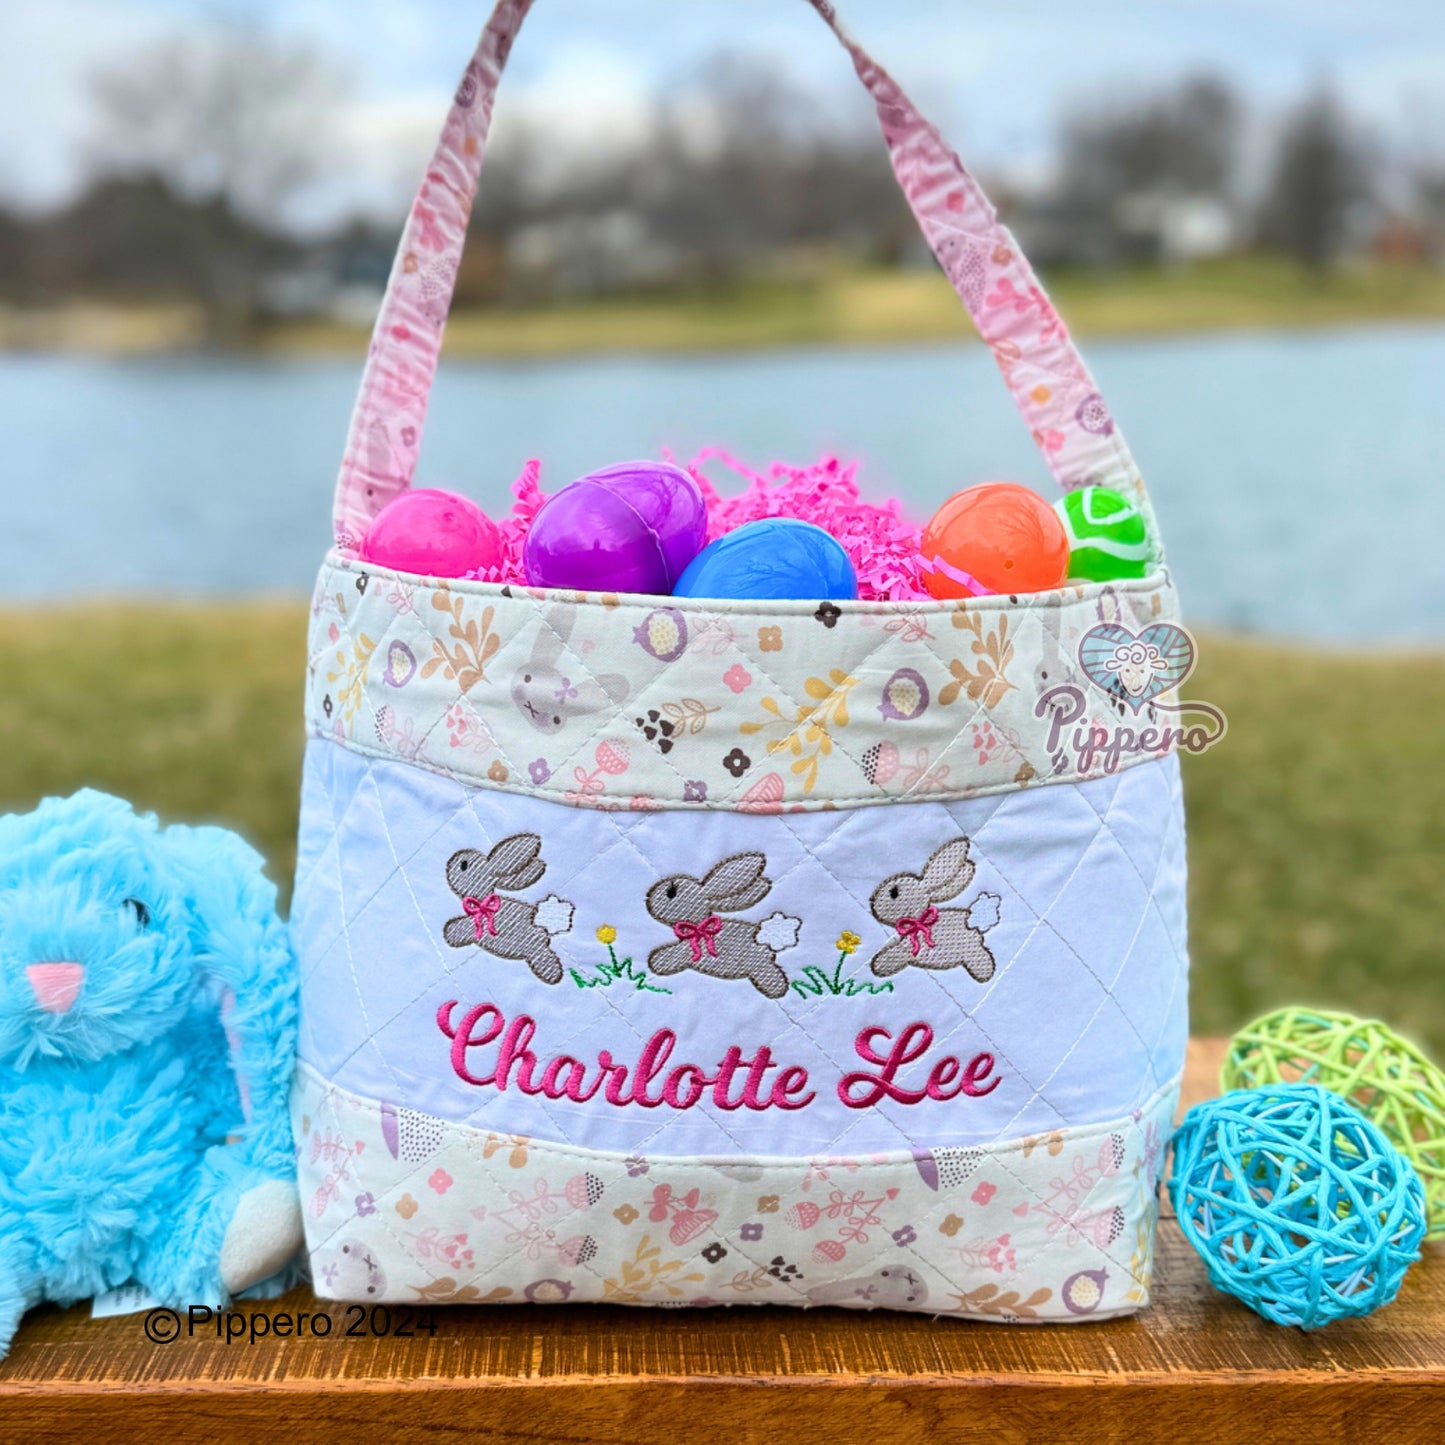 Personalized Custom Embroidered Quilted Bunny Easter Bag Basket Bucket Tote Blue or Pink Three Bunny Bow Design Kid’s Gift for Boy or Girl